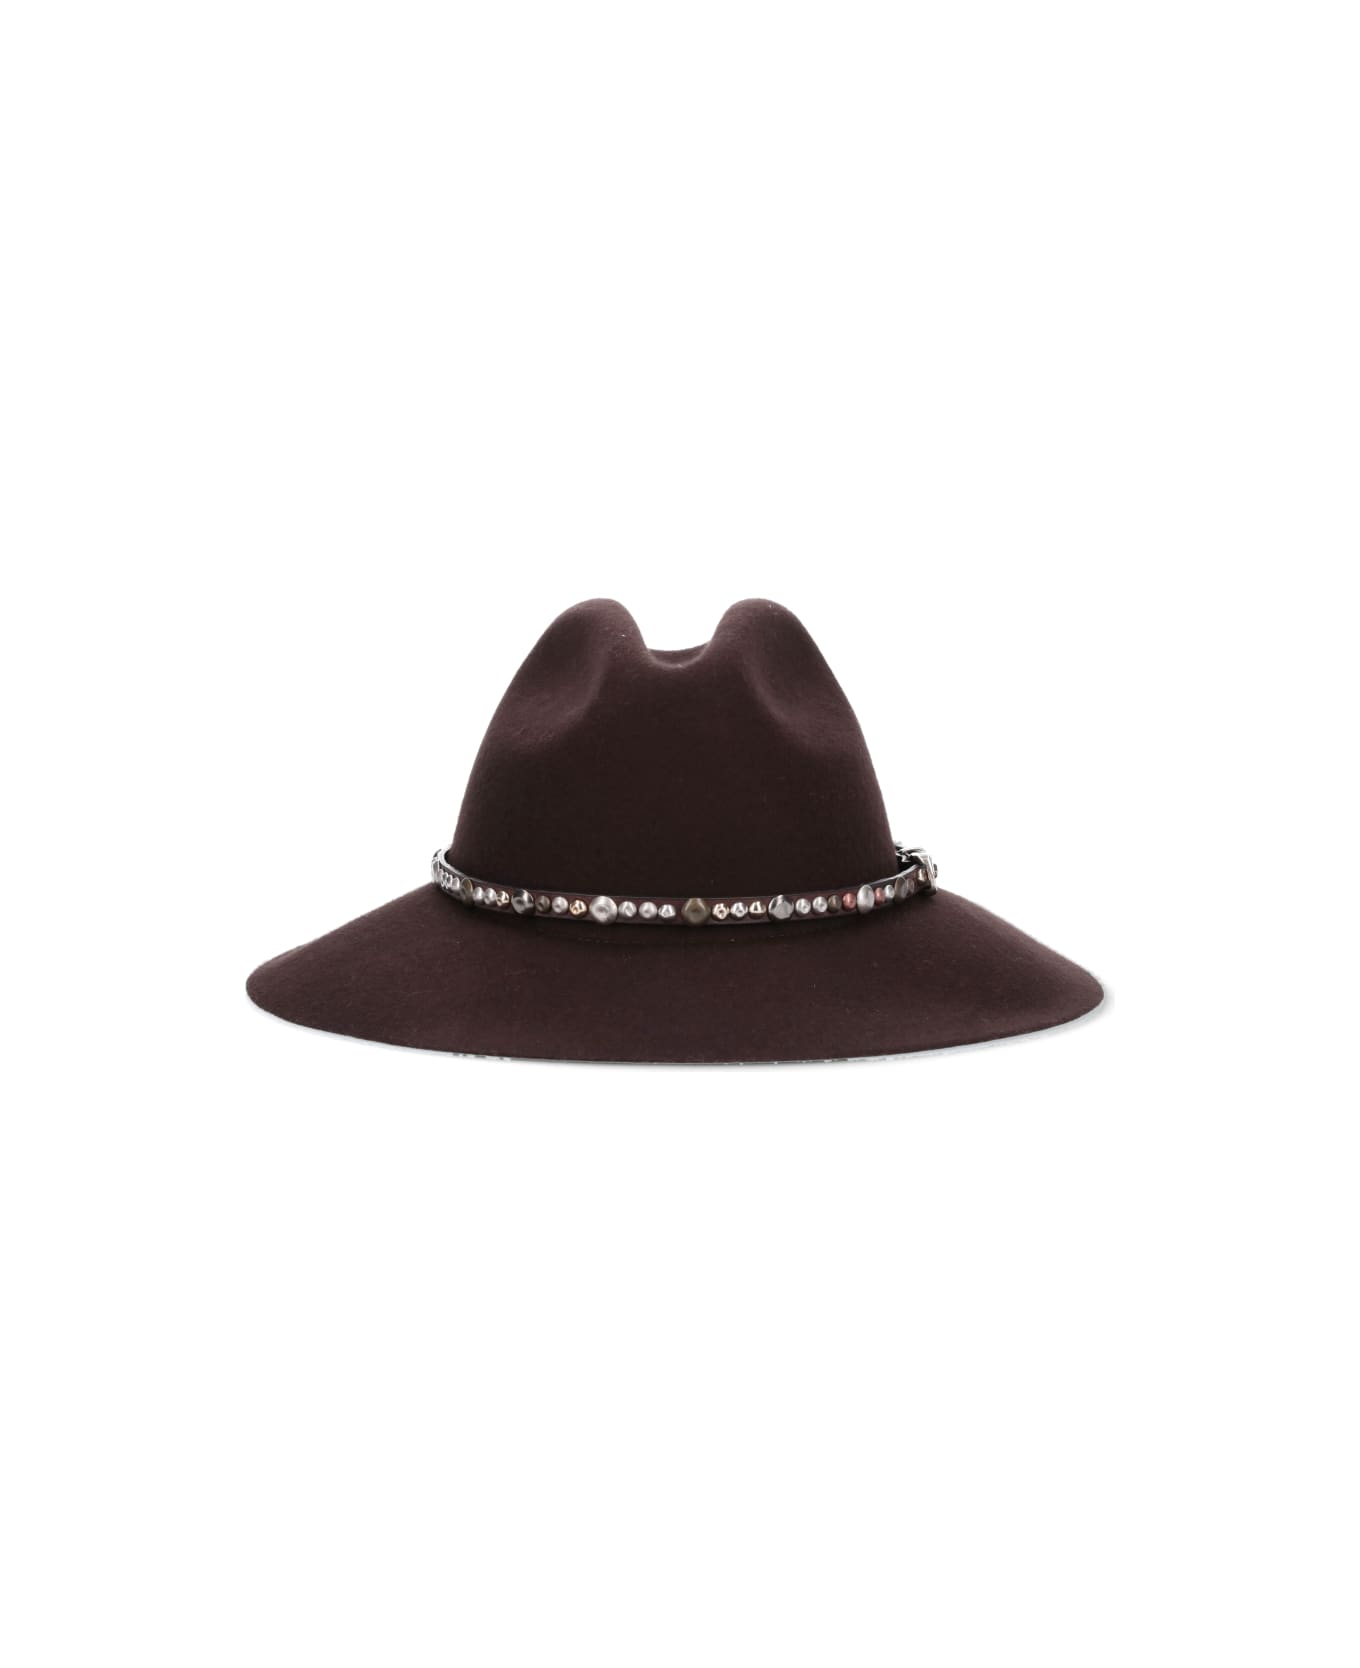 Golden Goose Hat With Strap - Brown